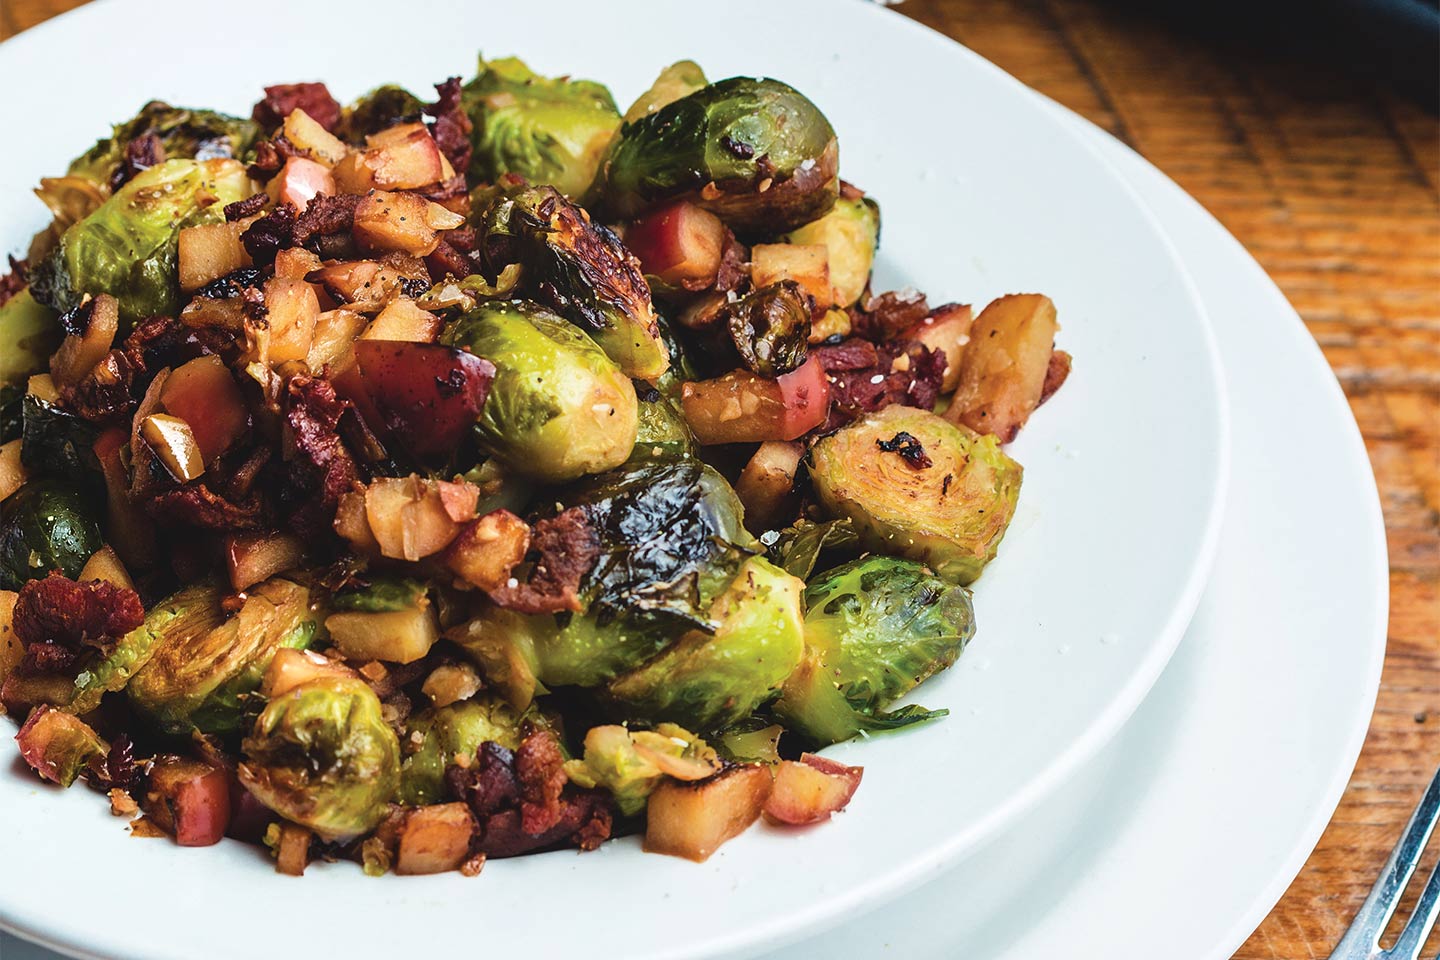 Sauteed brussel sprouts with gala apples